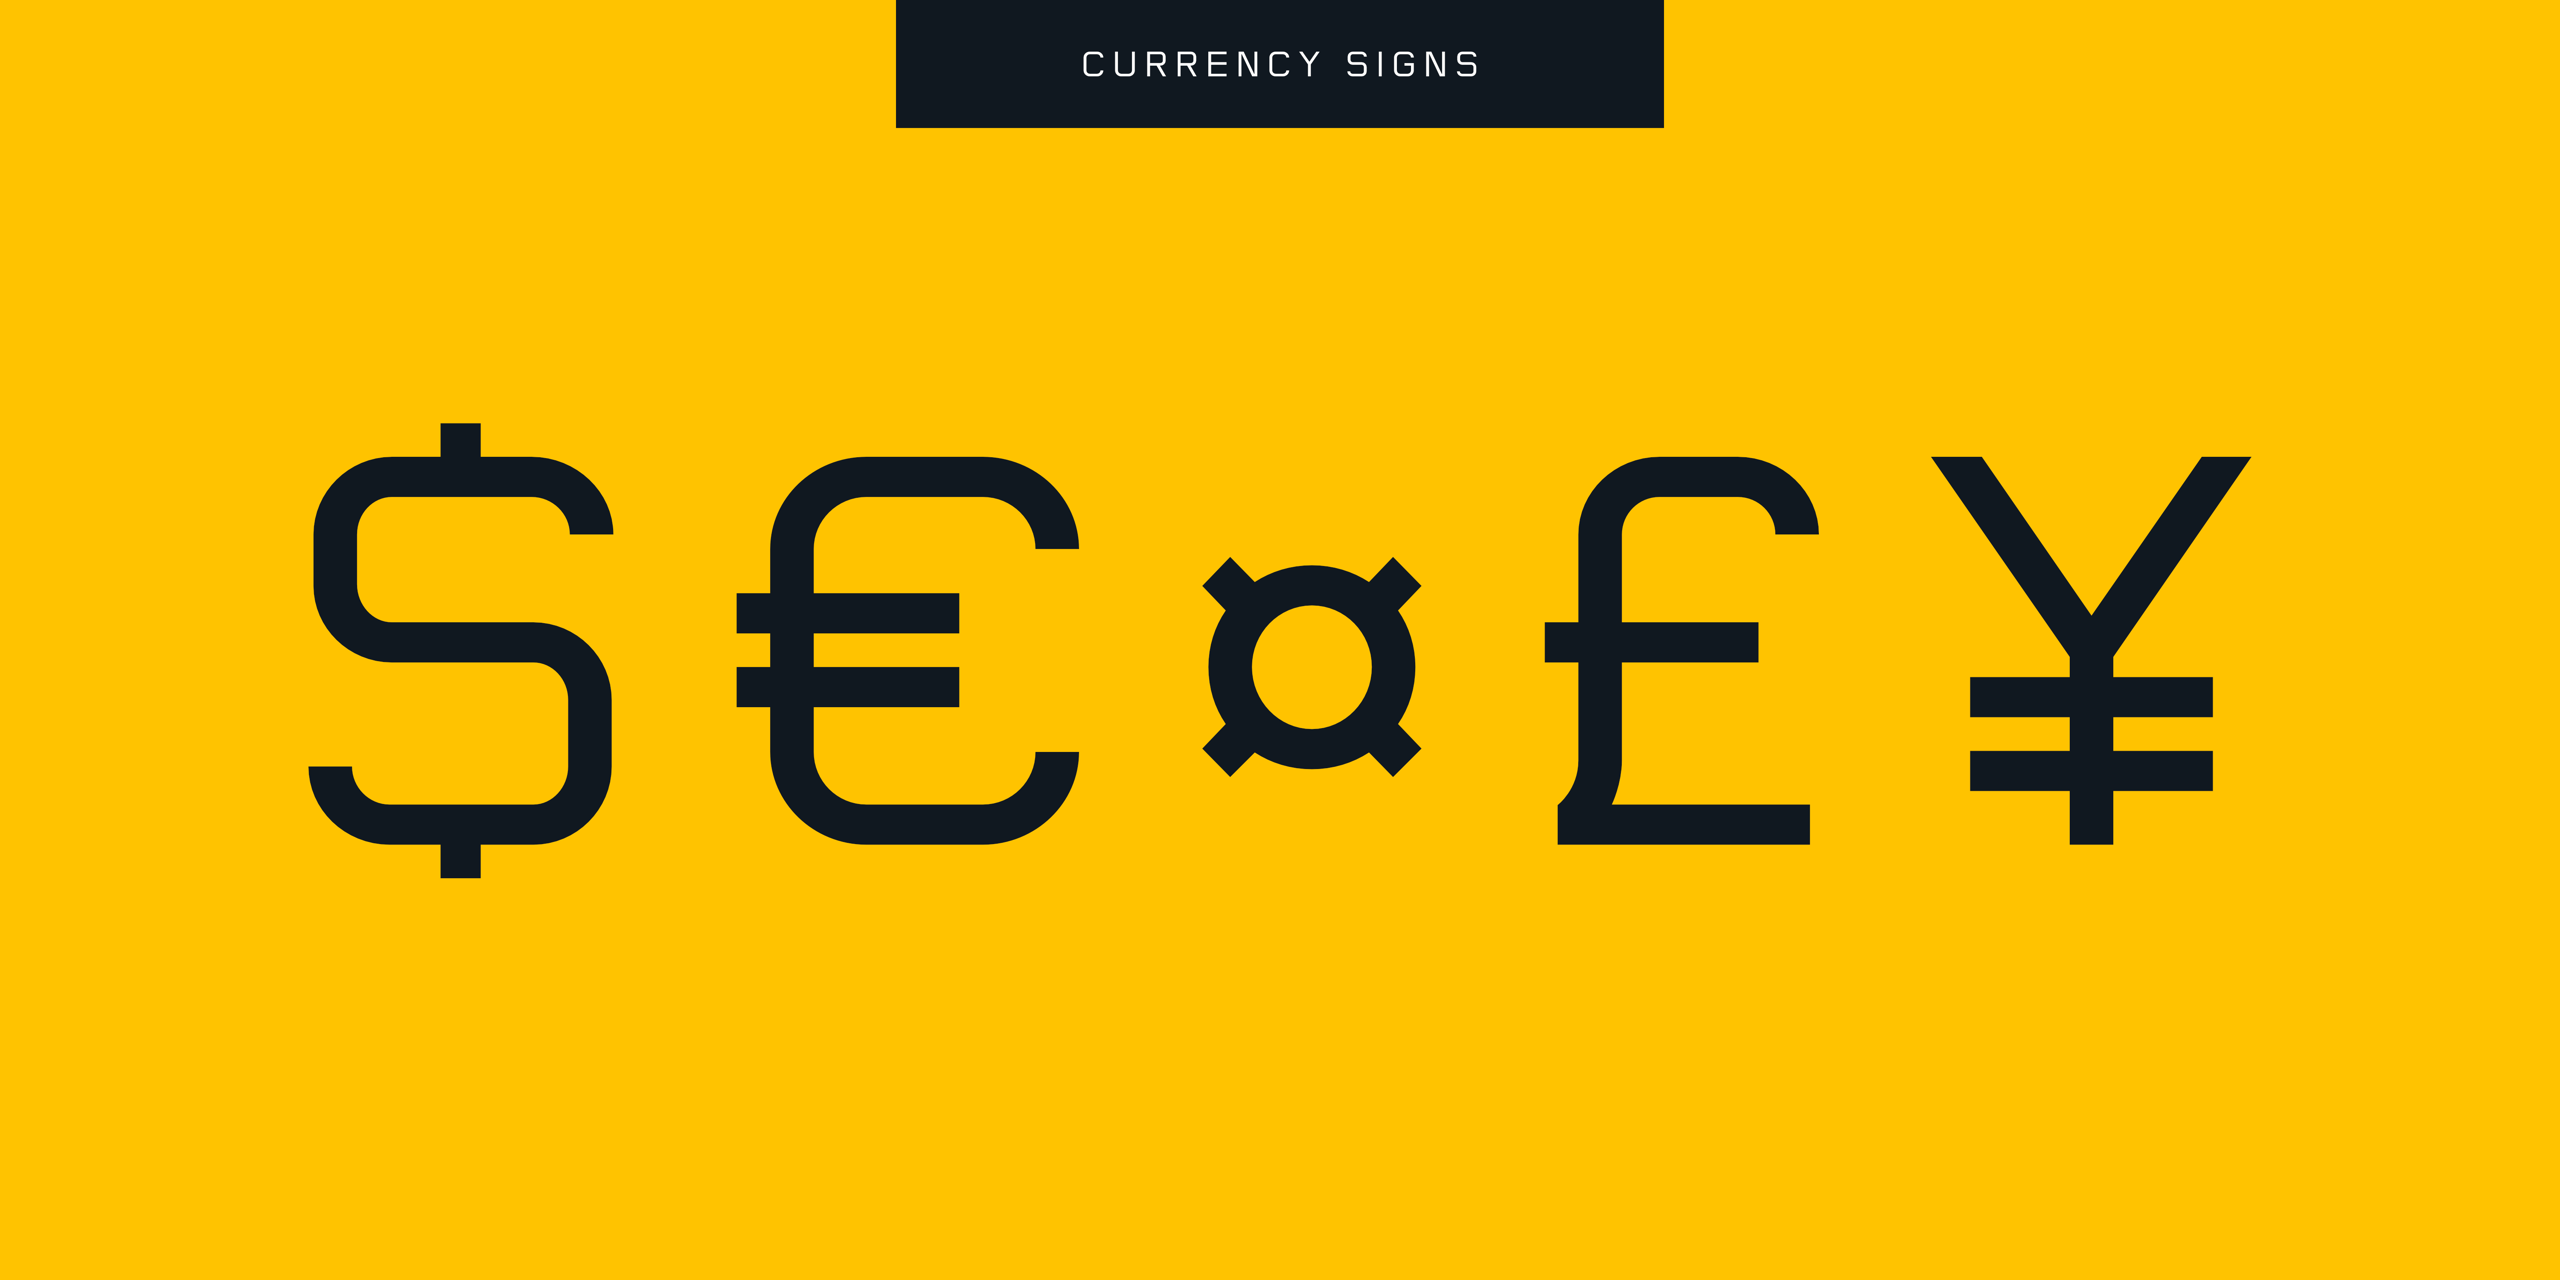 Flat Sans Typeface - currency signs.